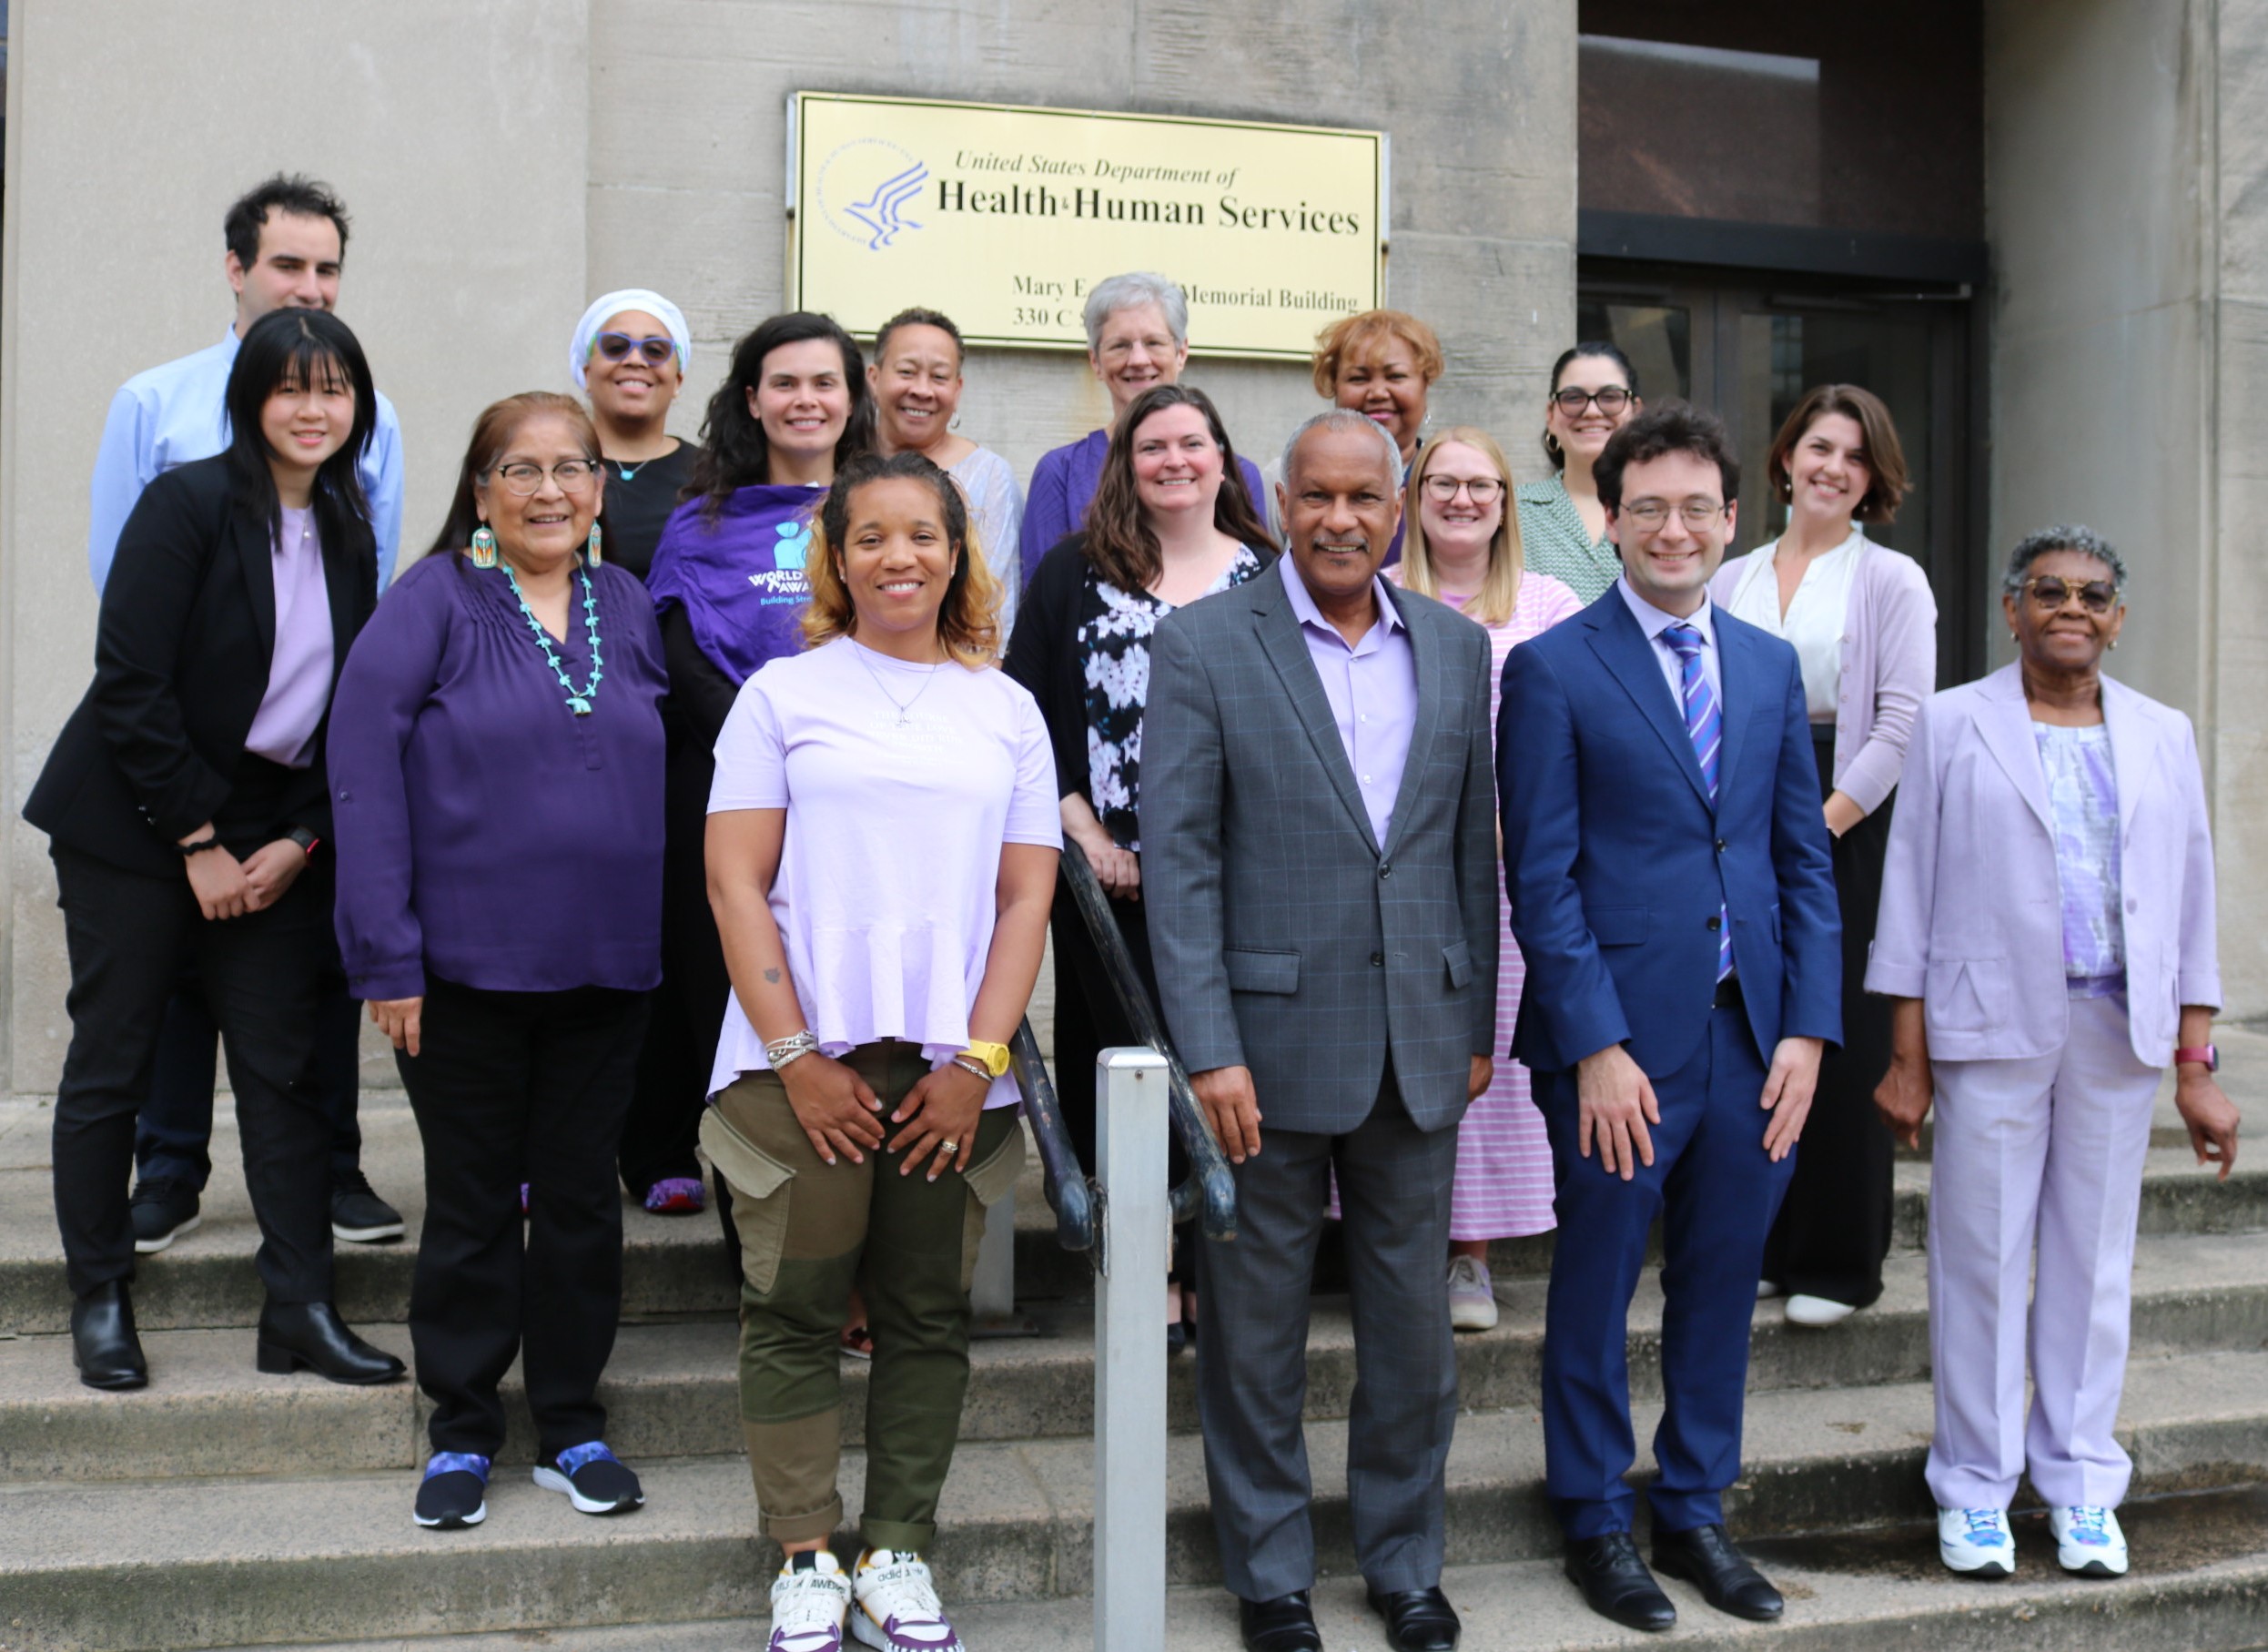 16 people wearing various shades of purple in front of a HHS building